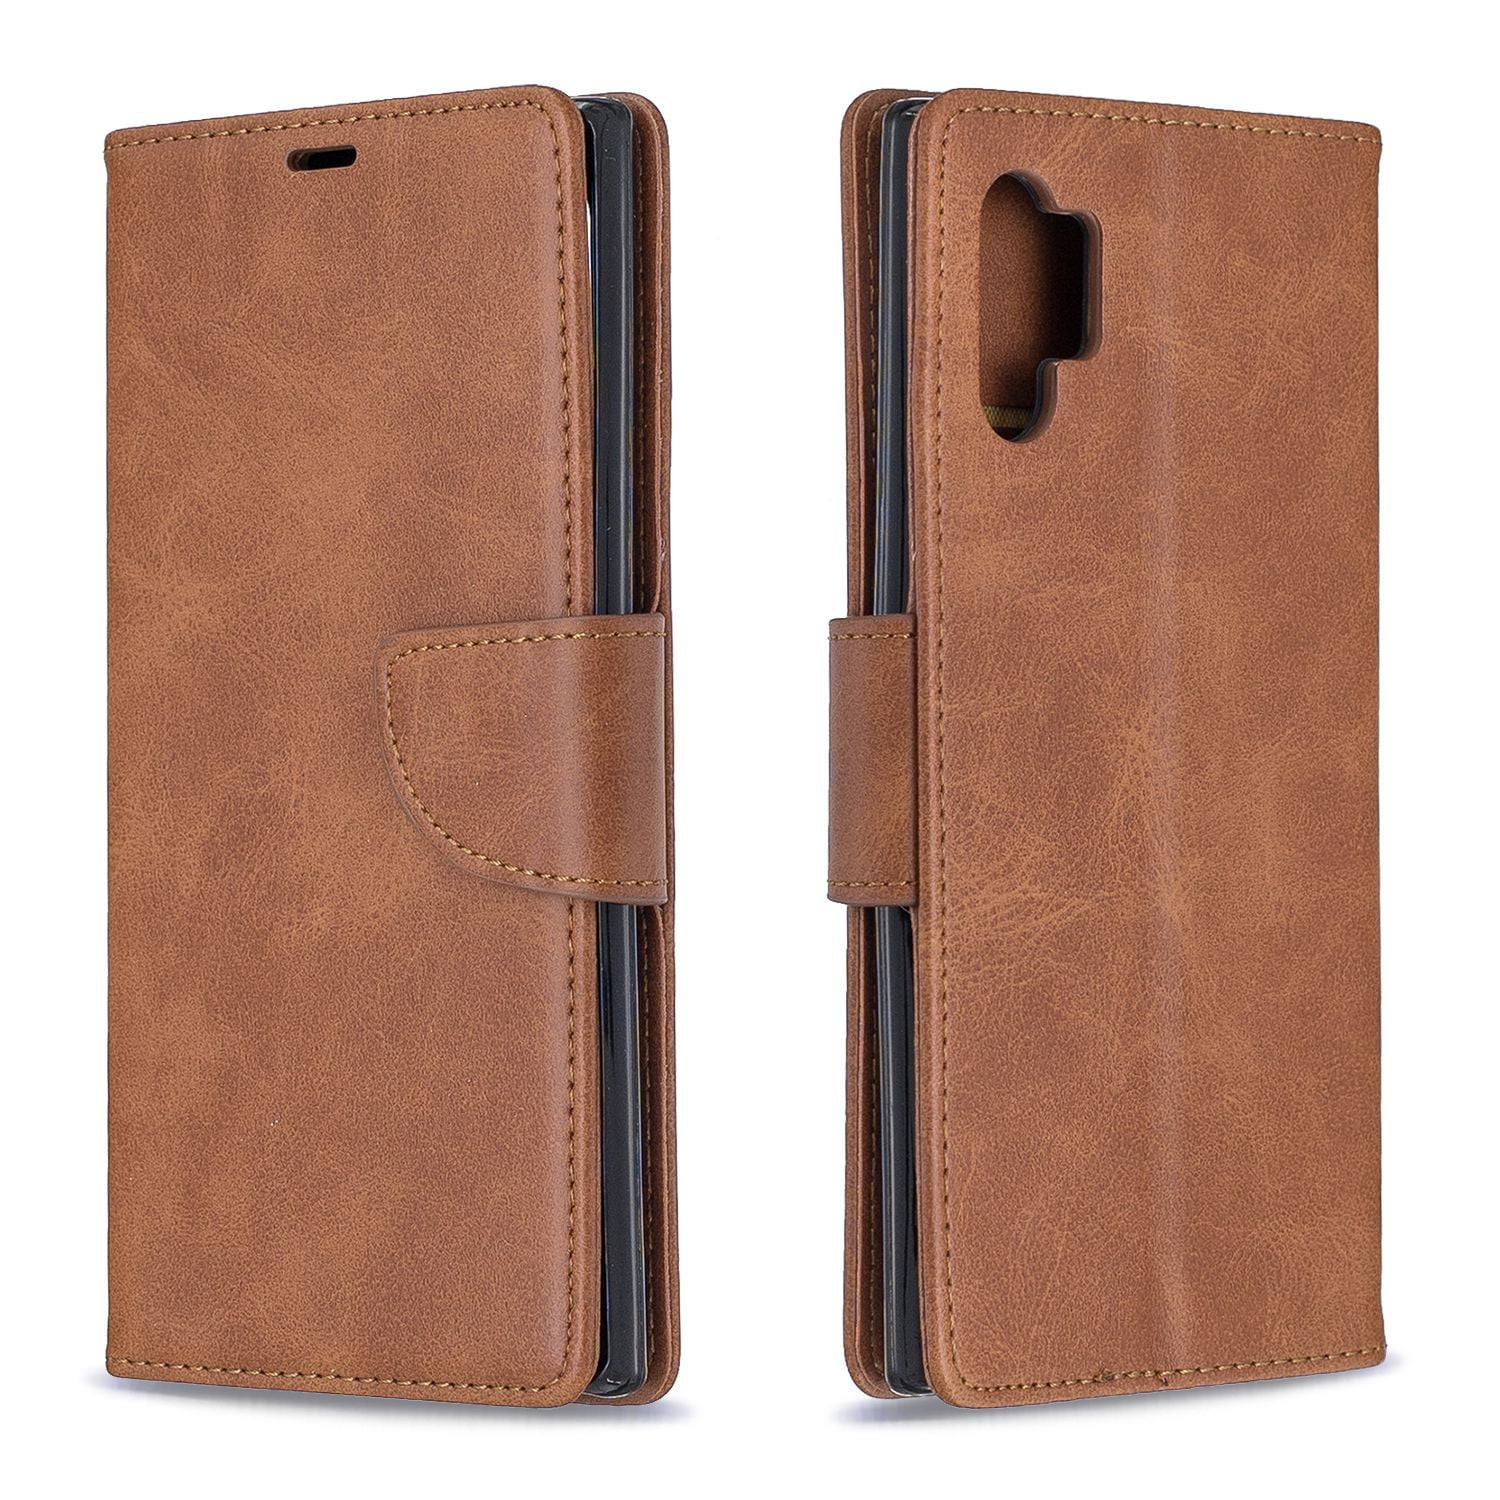 Wallet Case For Samsung Galaxy Note 10 Lite Case Luxury Dual Card Fabrics  Cover For Samsung